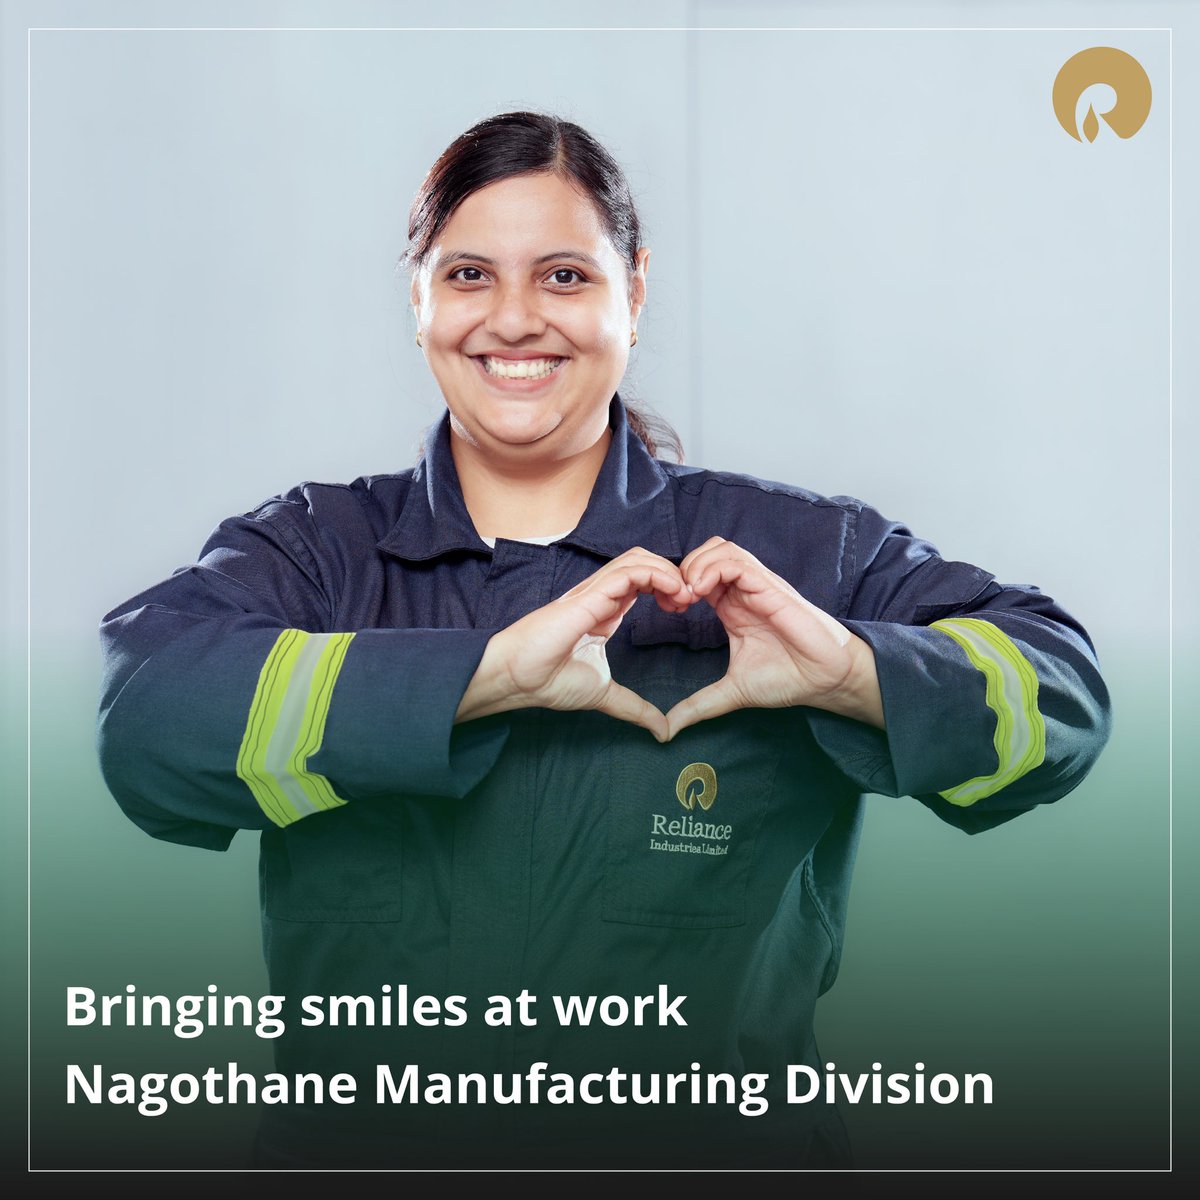 Creating chemistry with smiles! Our amazing colleagues at Nagothane Manufacturing Division make the magic happen every day with their passionate spirit.
…
#WorldofReliance #RPeople #RPlaces #NMD #RILWayofLife